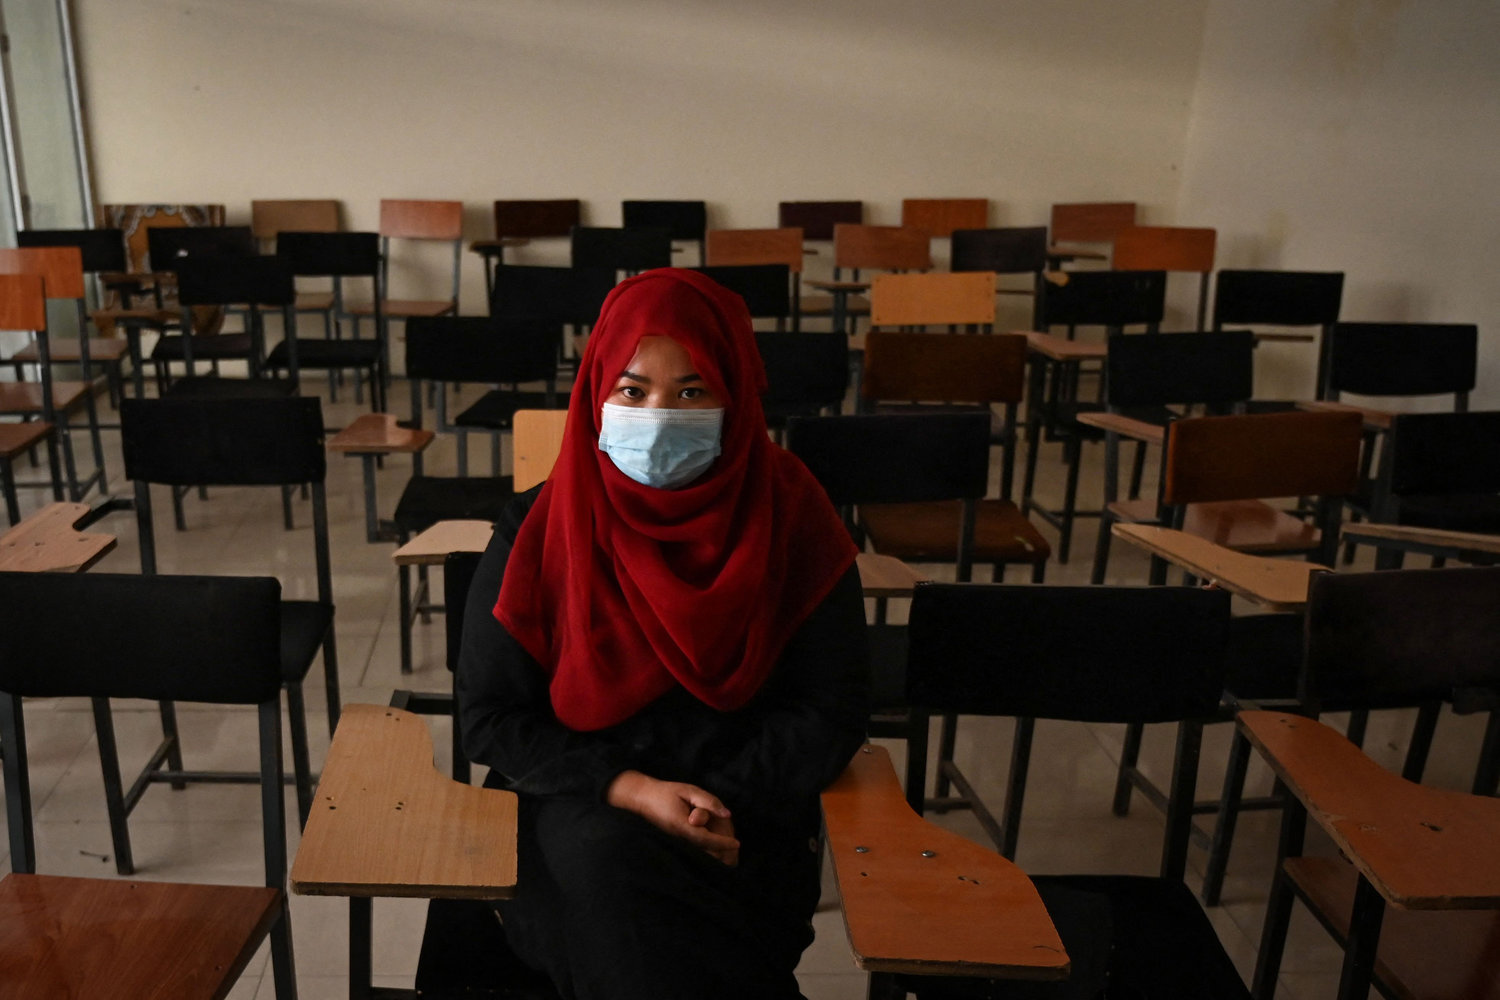 A student sits inside a classroom after private universities reopened in Kabul, Afghanistan, on Sept. 6, 2021. The Taliban said this week that female students won't be able to return to Kabul University until "a real Islamic environment" is provided for all. (Aamir Qureshi/AFP/Getty Images/TNS)